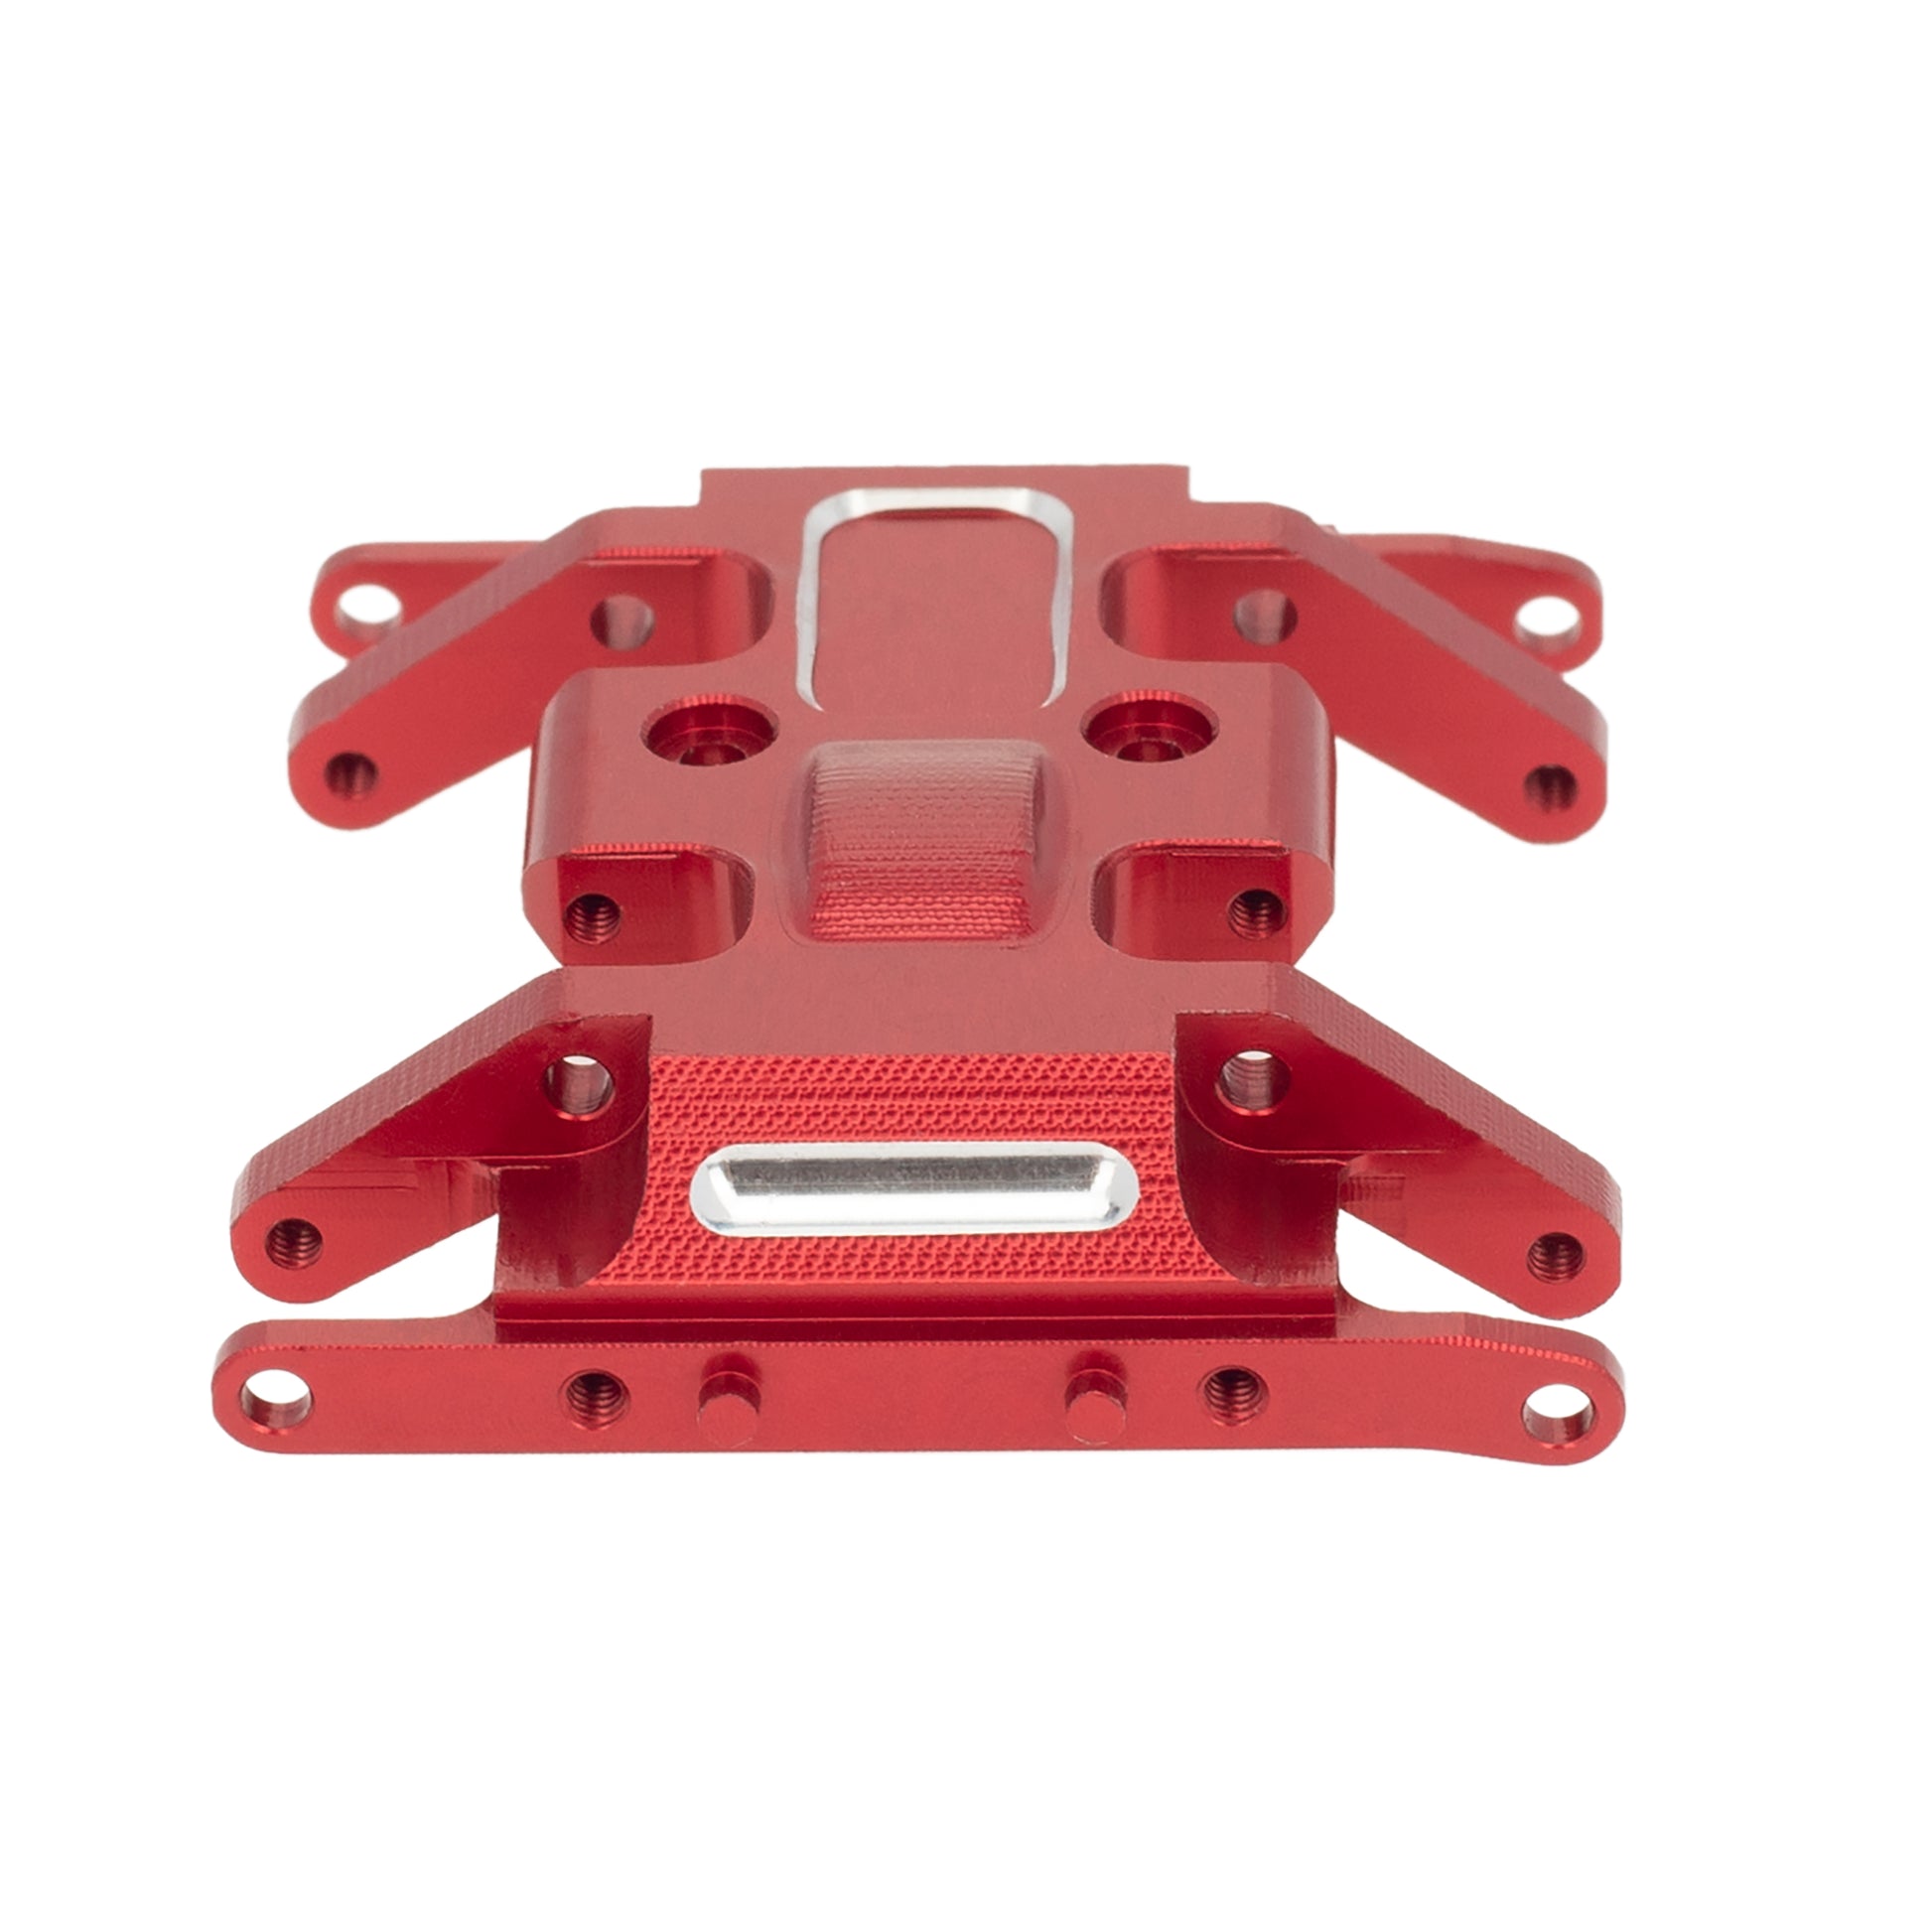 Red Center Transmission Skid Plate for Axial SCX24 90081 Wrangler.